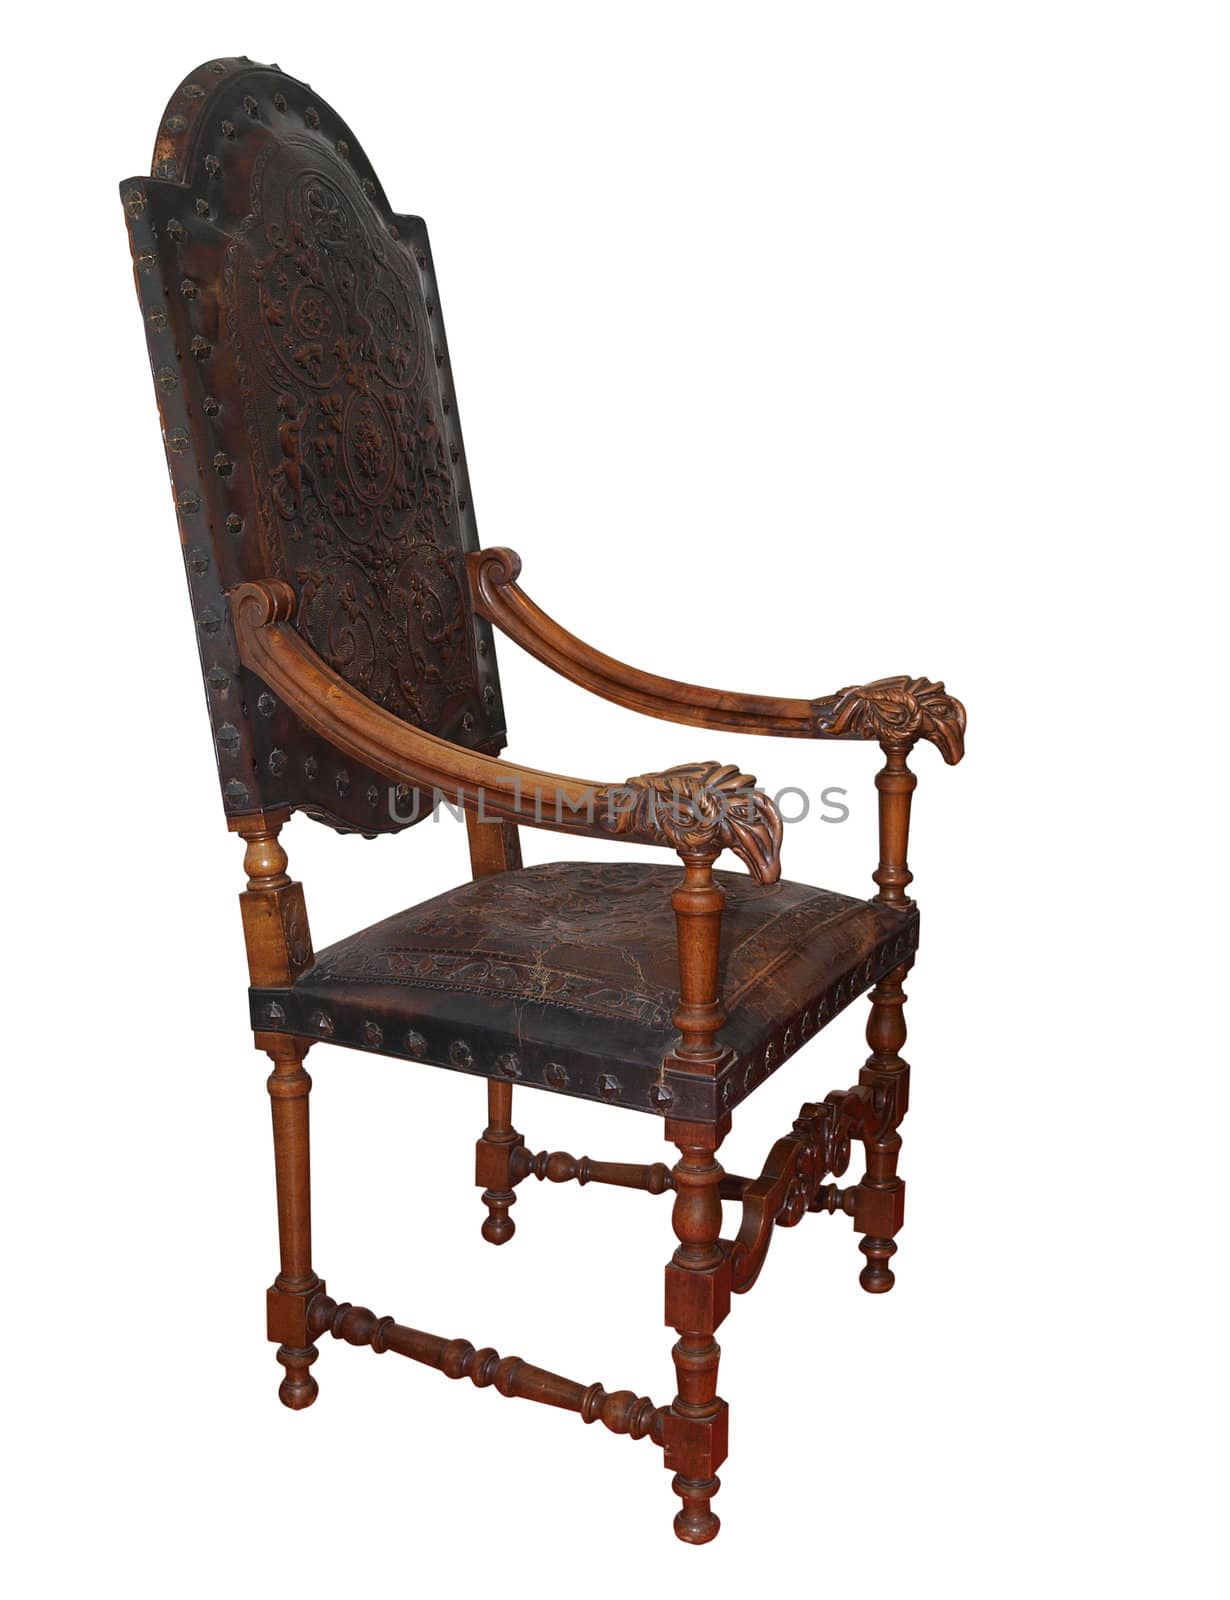 Ornate Antique Leather Chair isolated with clipping path
      